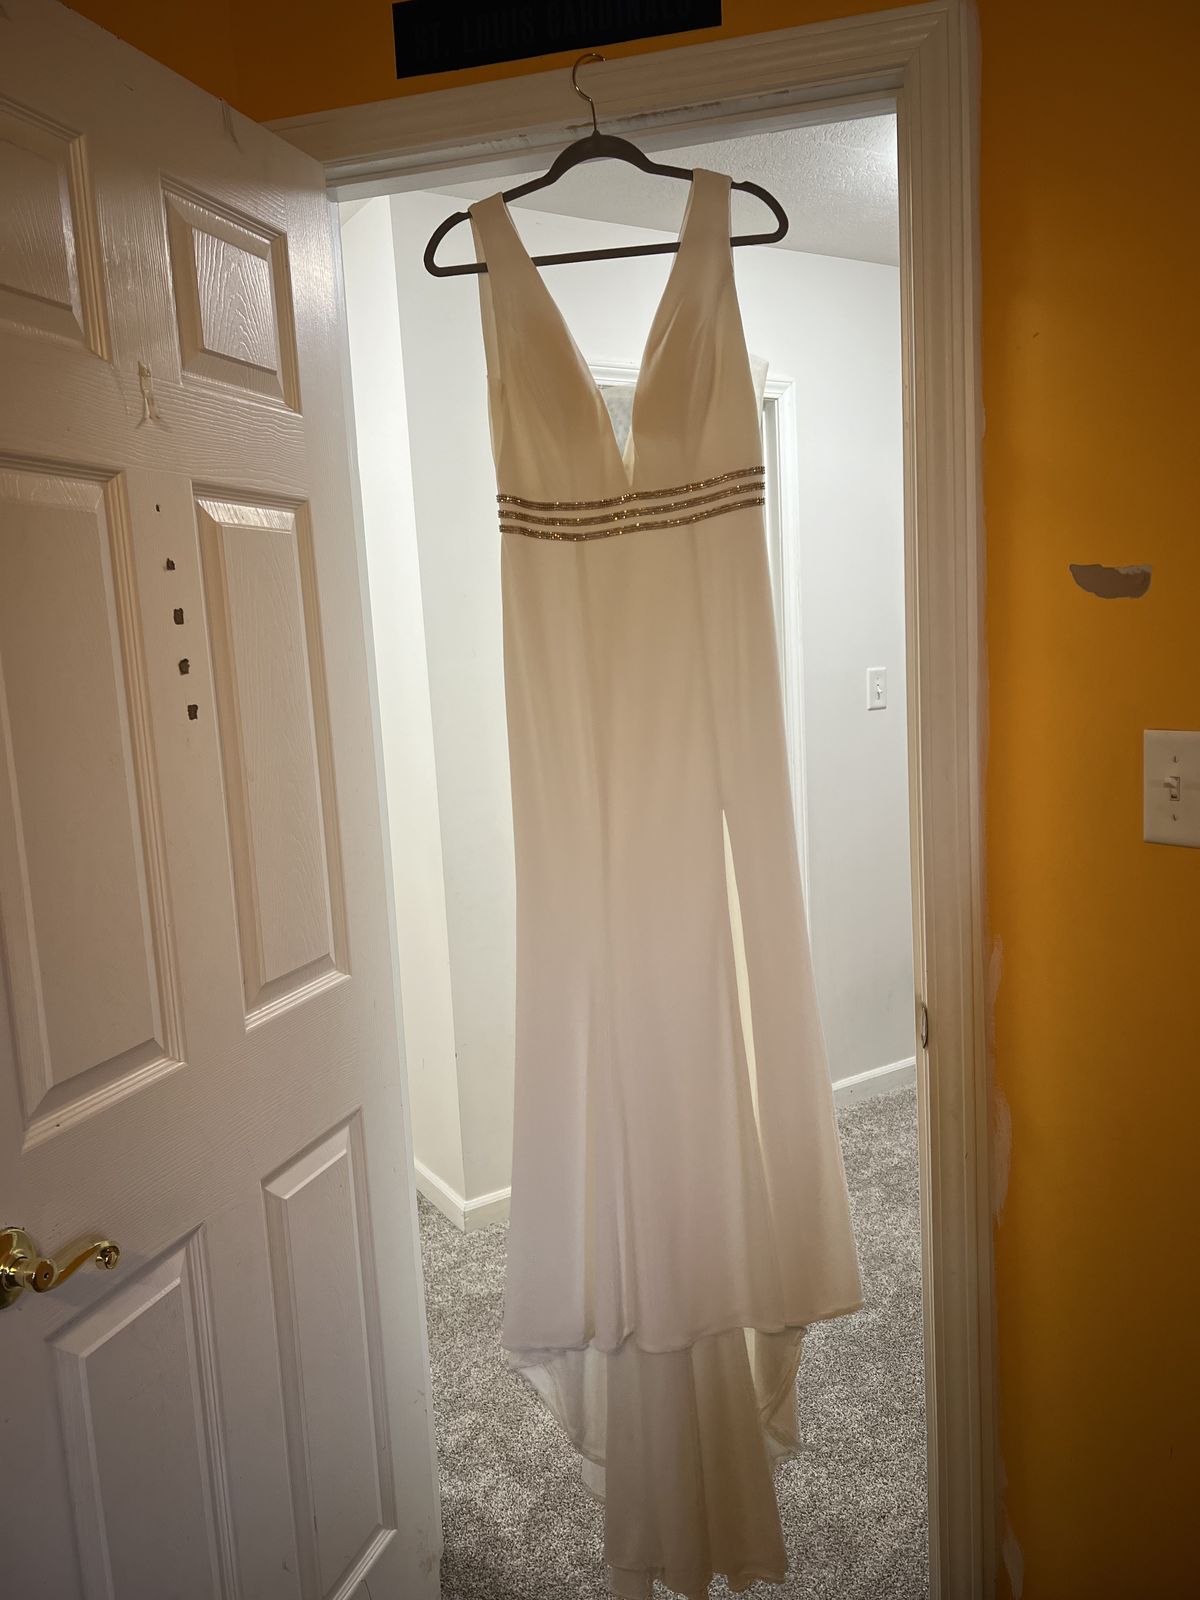 Size 8 White A-line Dress on Queenly